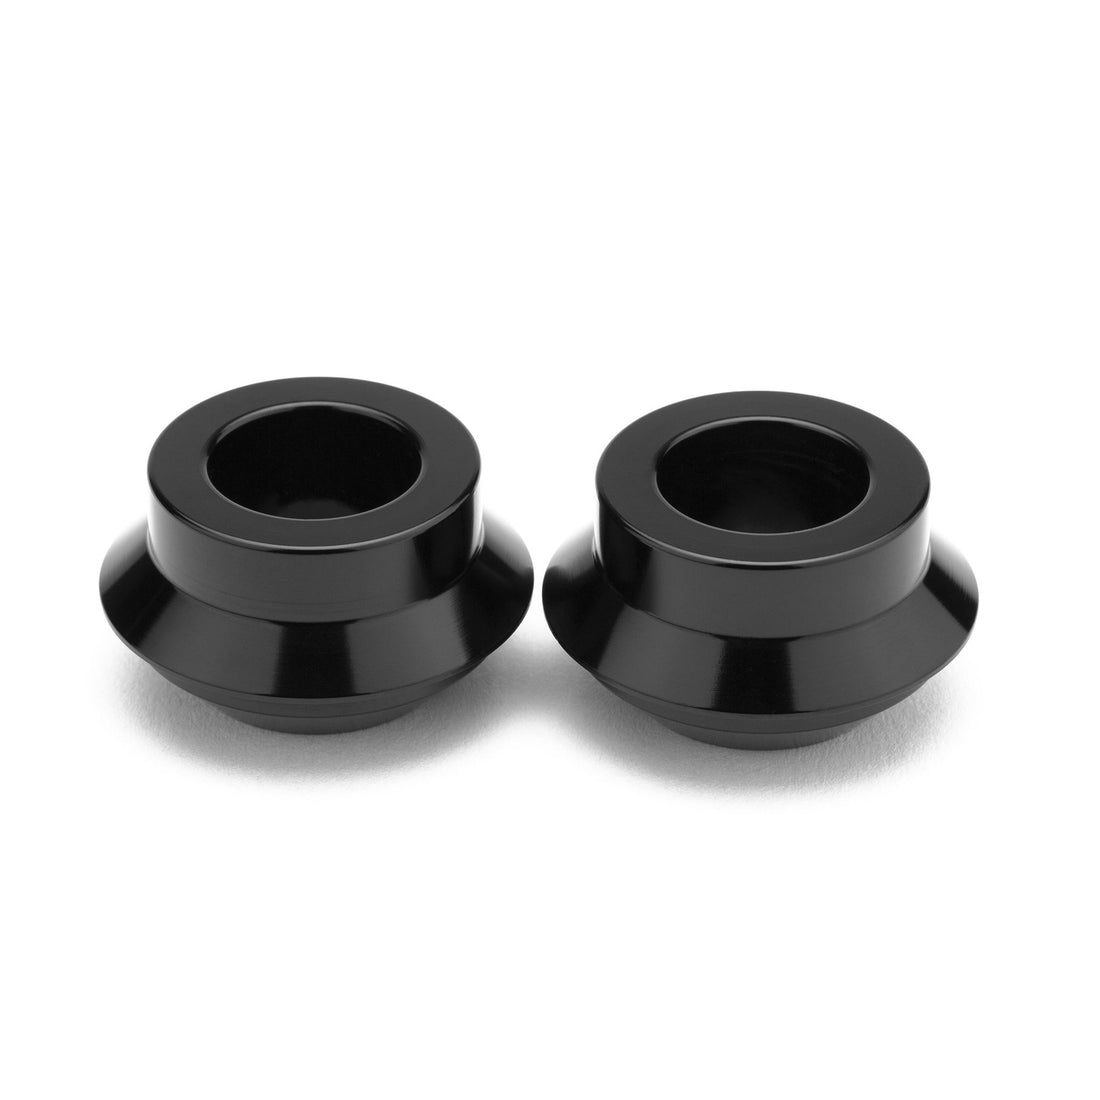 Cinema|FX FRONT CONES |Cycle LM (4550129287261)